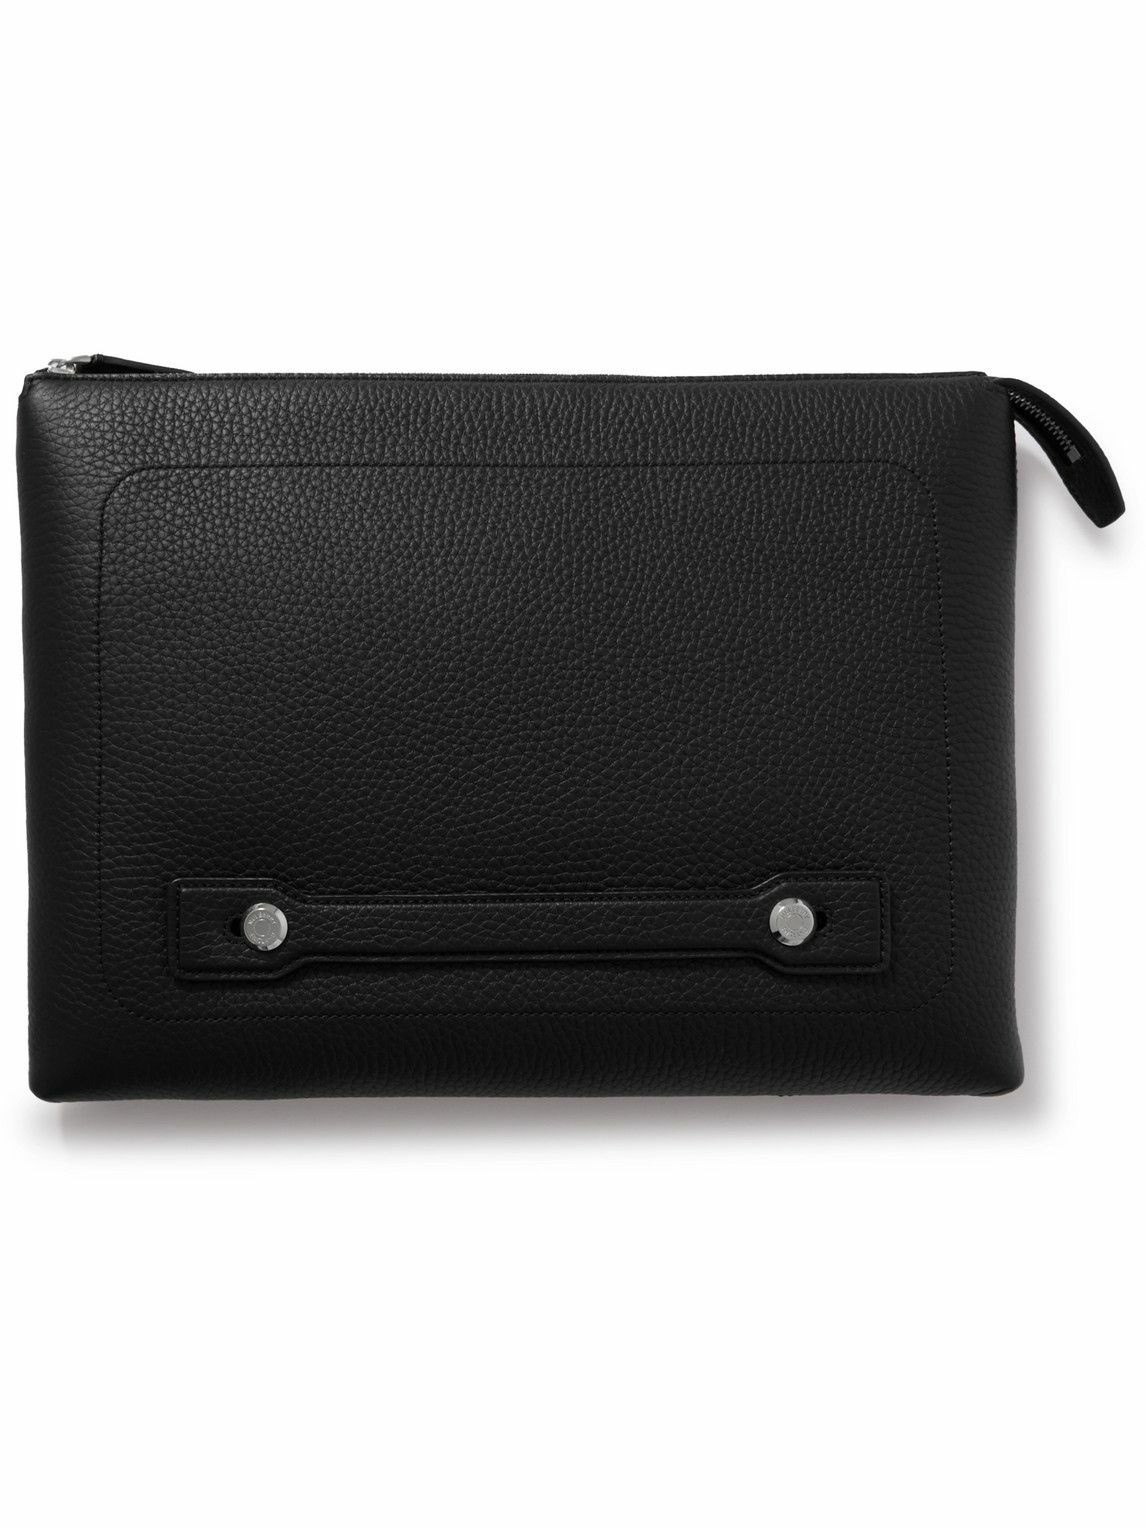 Mulberry - City Full-Grain Leather Laptop Case Mulberry